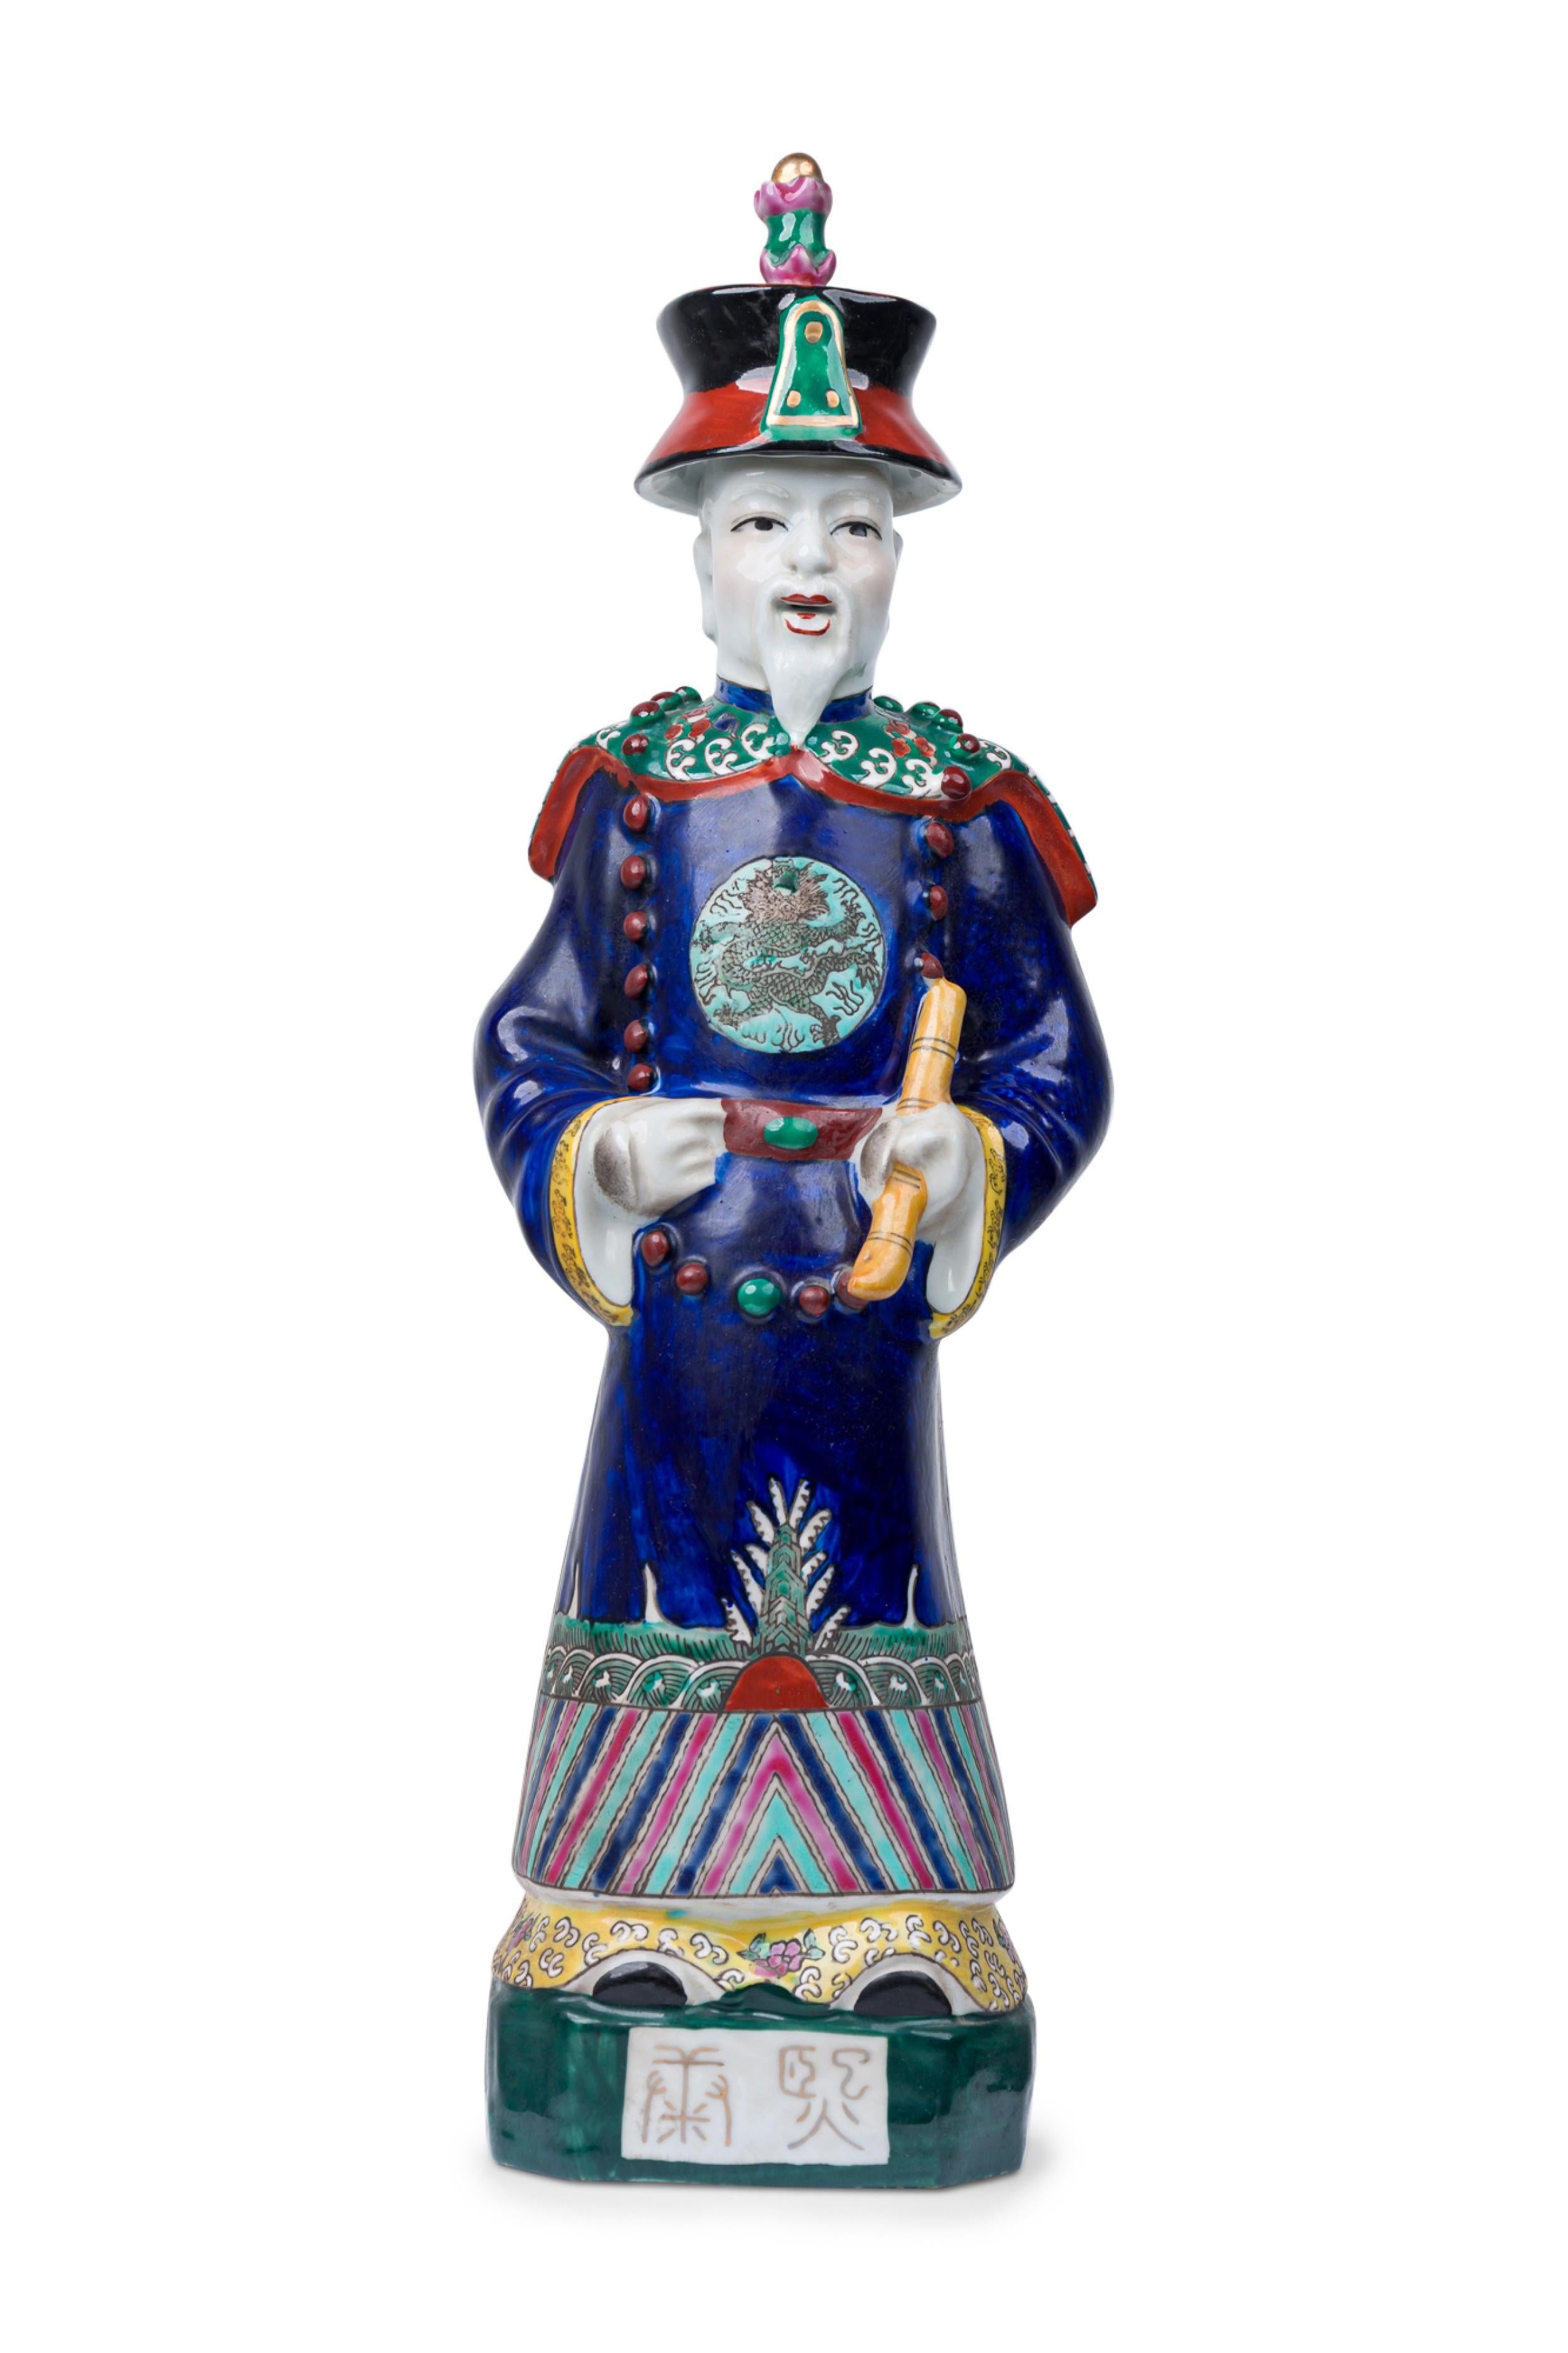 Pair of Chinese Painted Ceramic Figures Depicting a Blue Robed Emperor For Sale 14